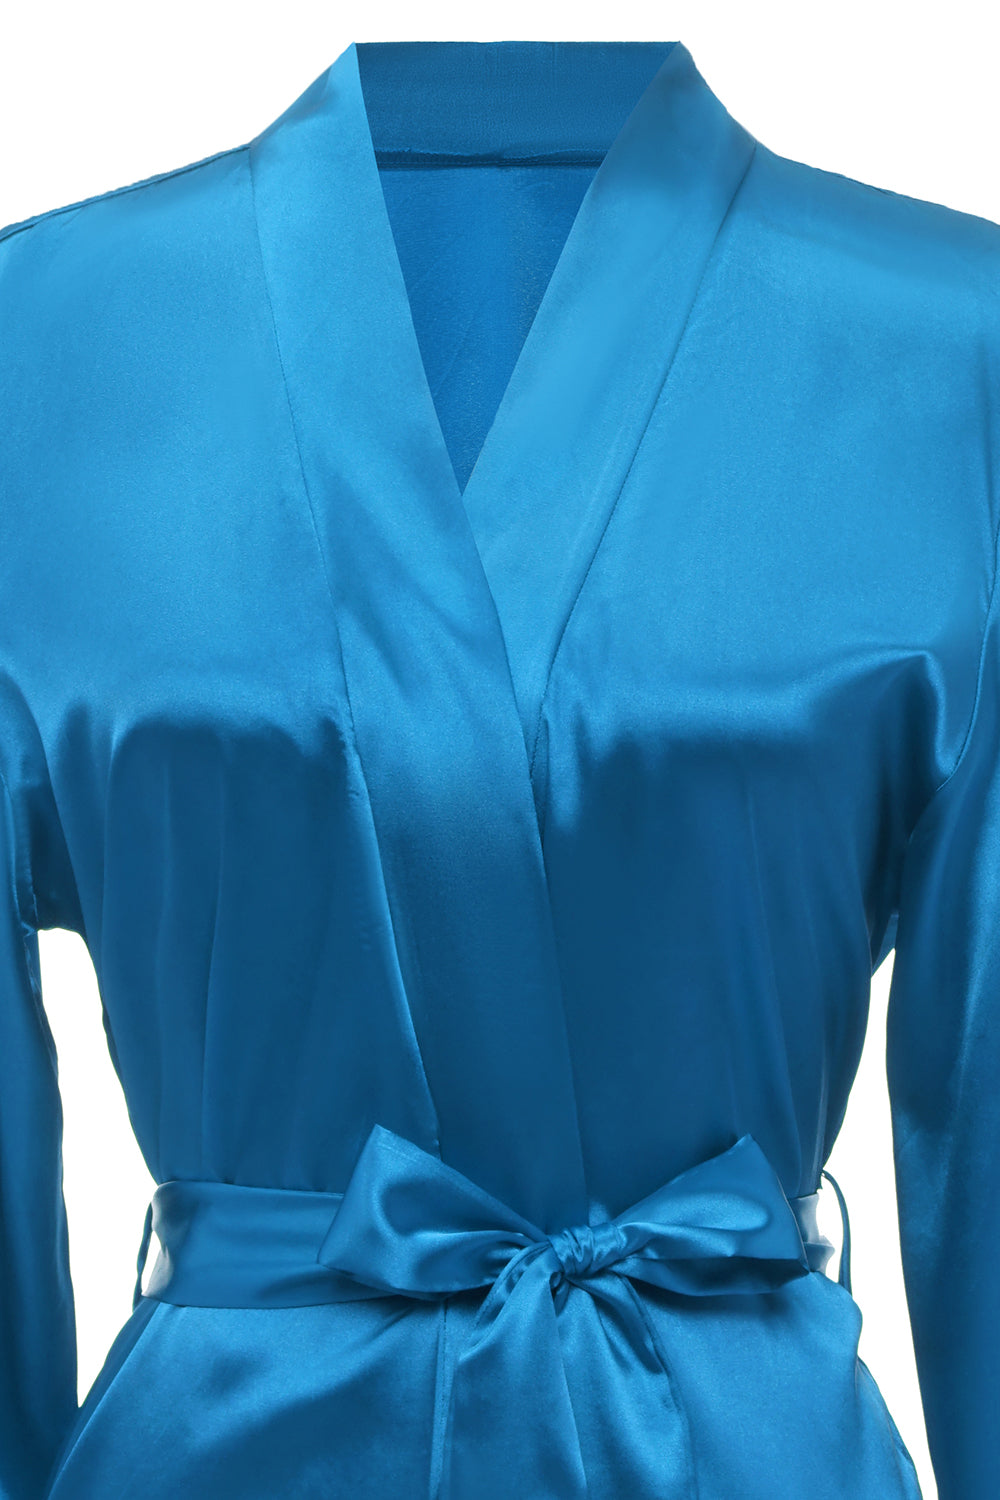 Blue Bridesamaid Robe With Lace